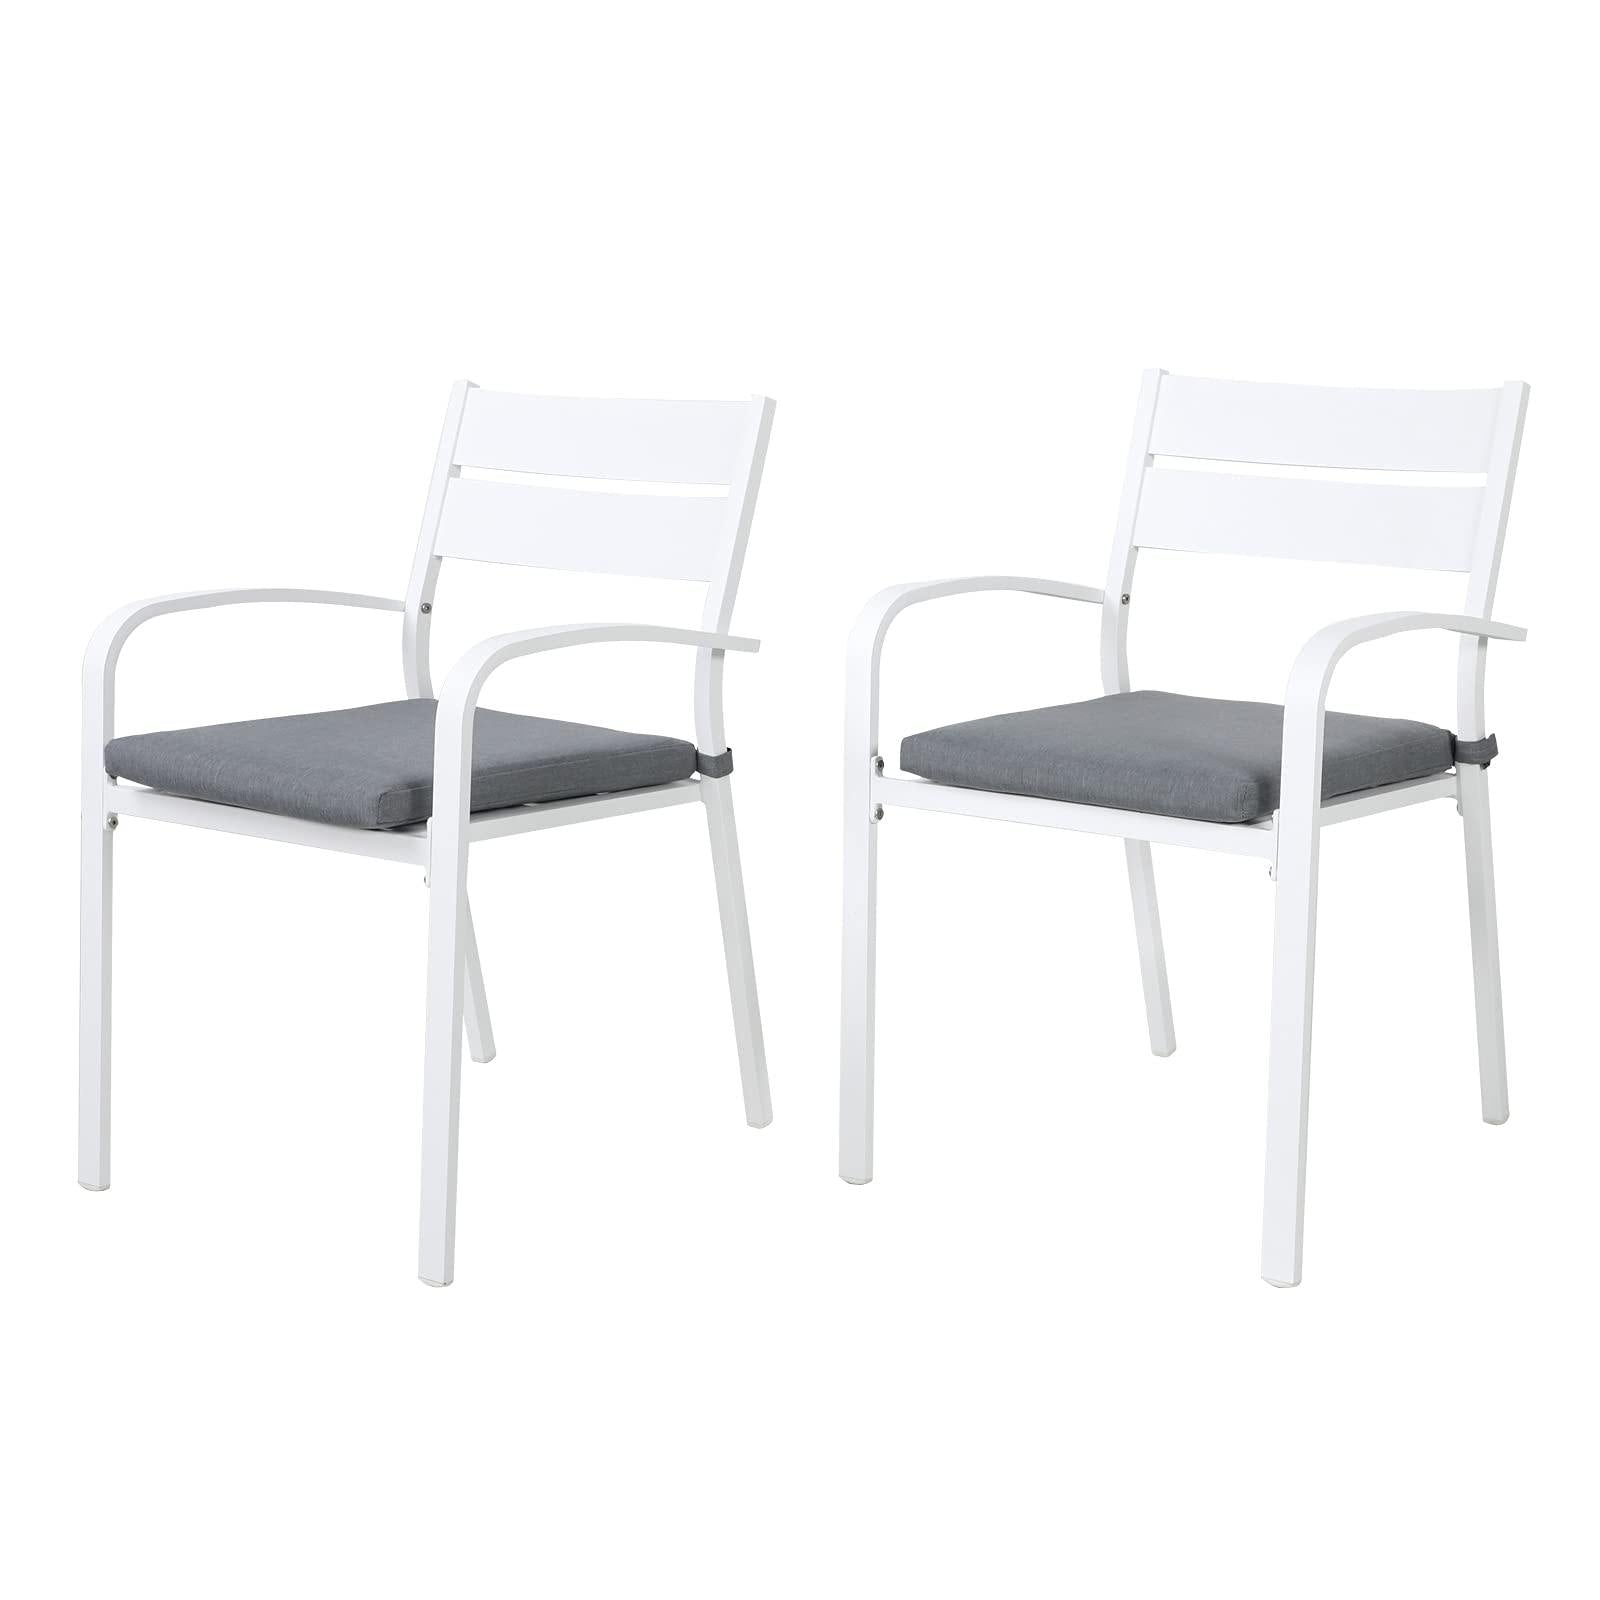 Vista 2-pc. Patio Dining Chairs with Cushions, Aluminum sale best - OrangeCasual #Color_white